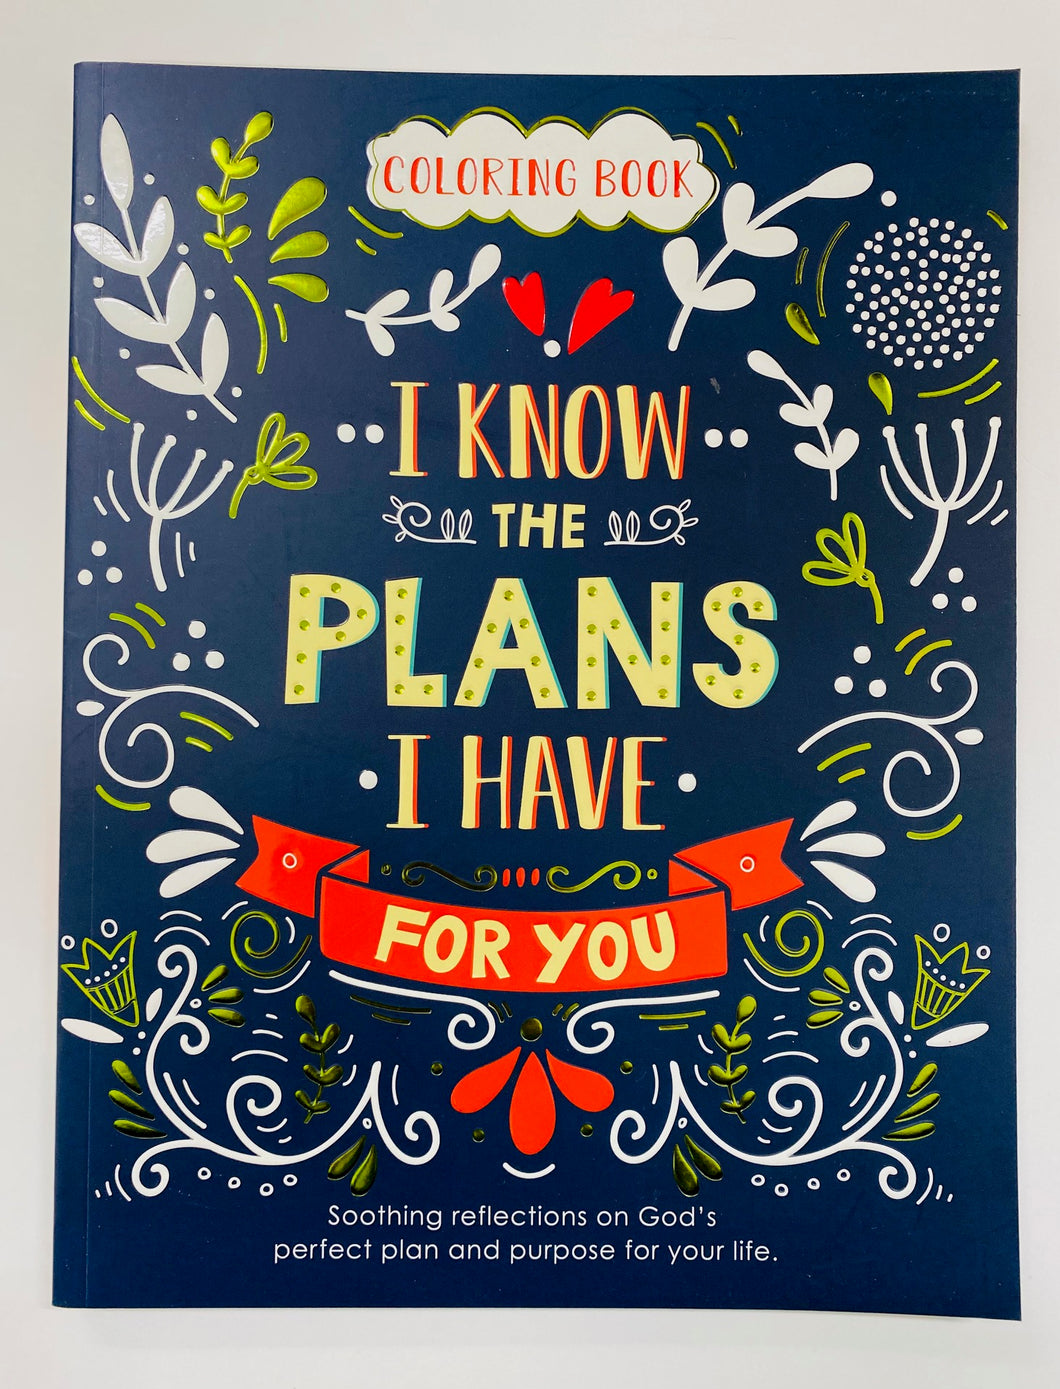 Colouring Book: I Know the Plans I Have for You.